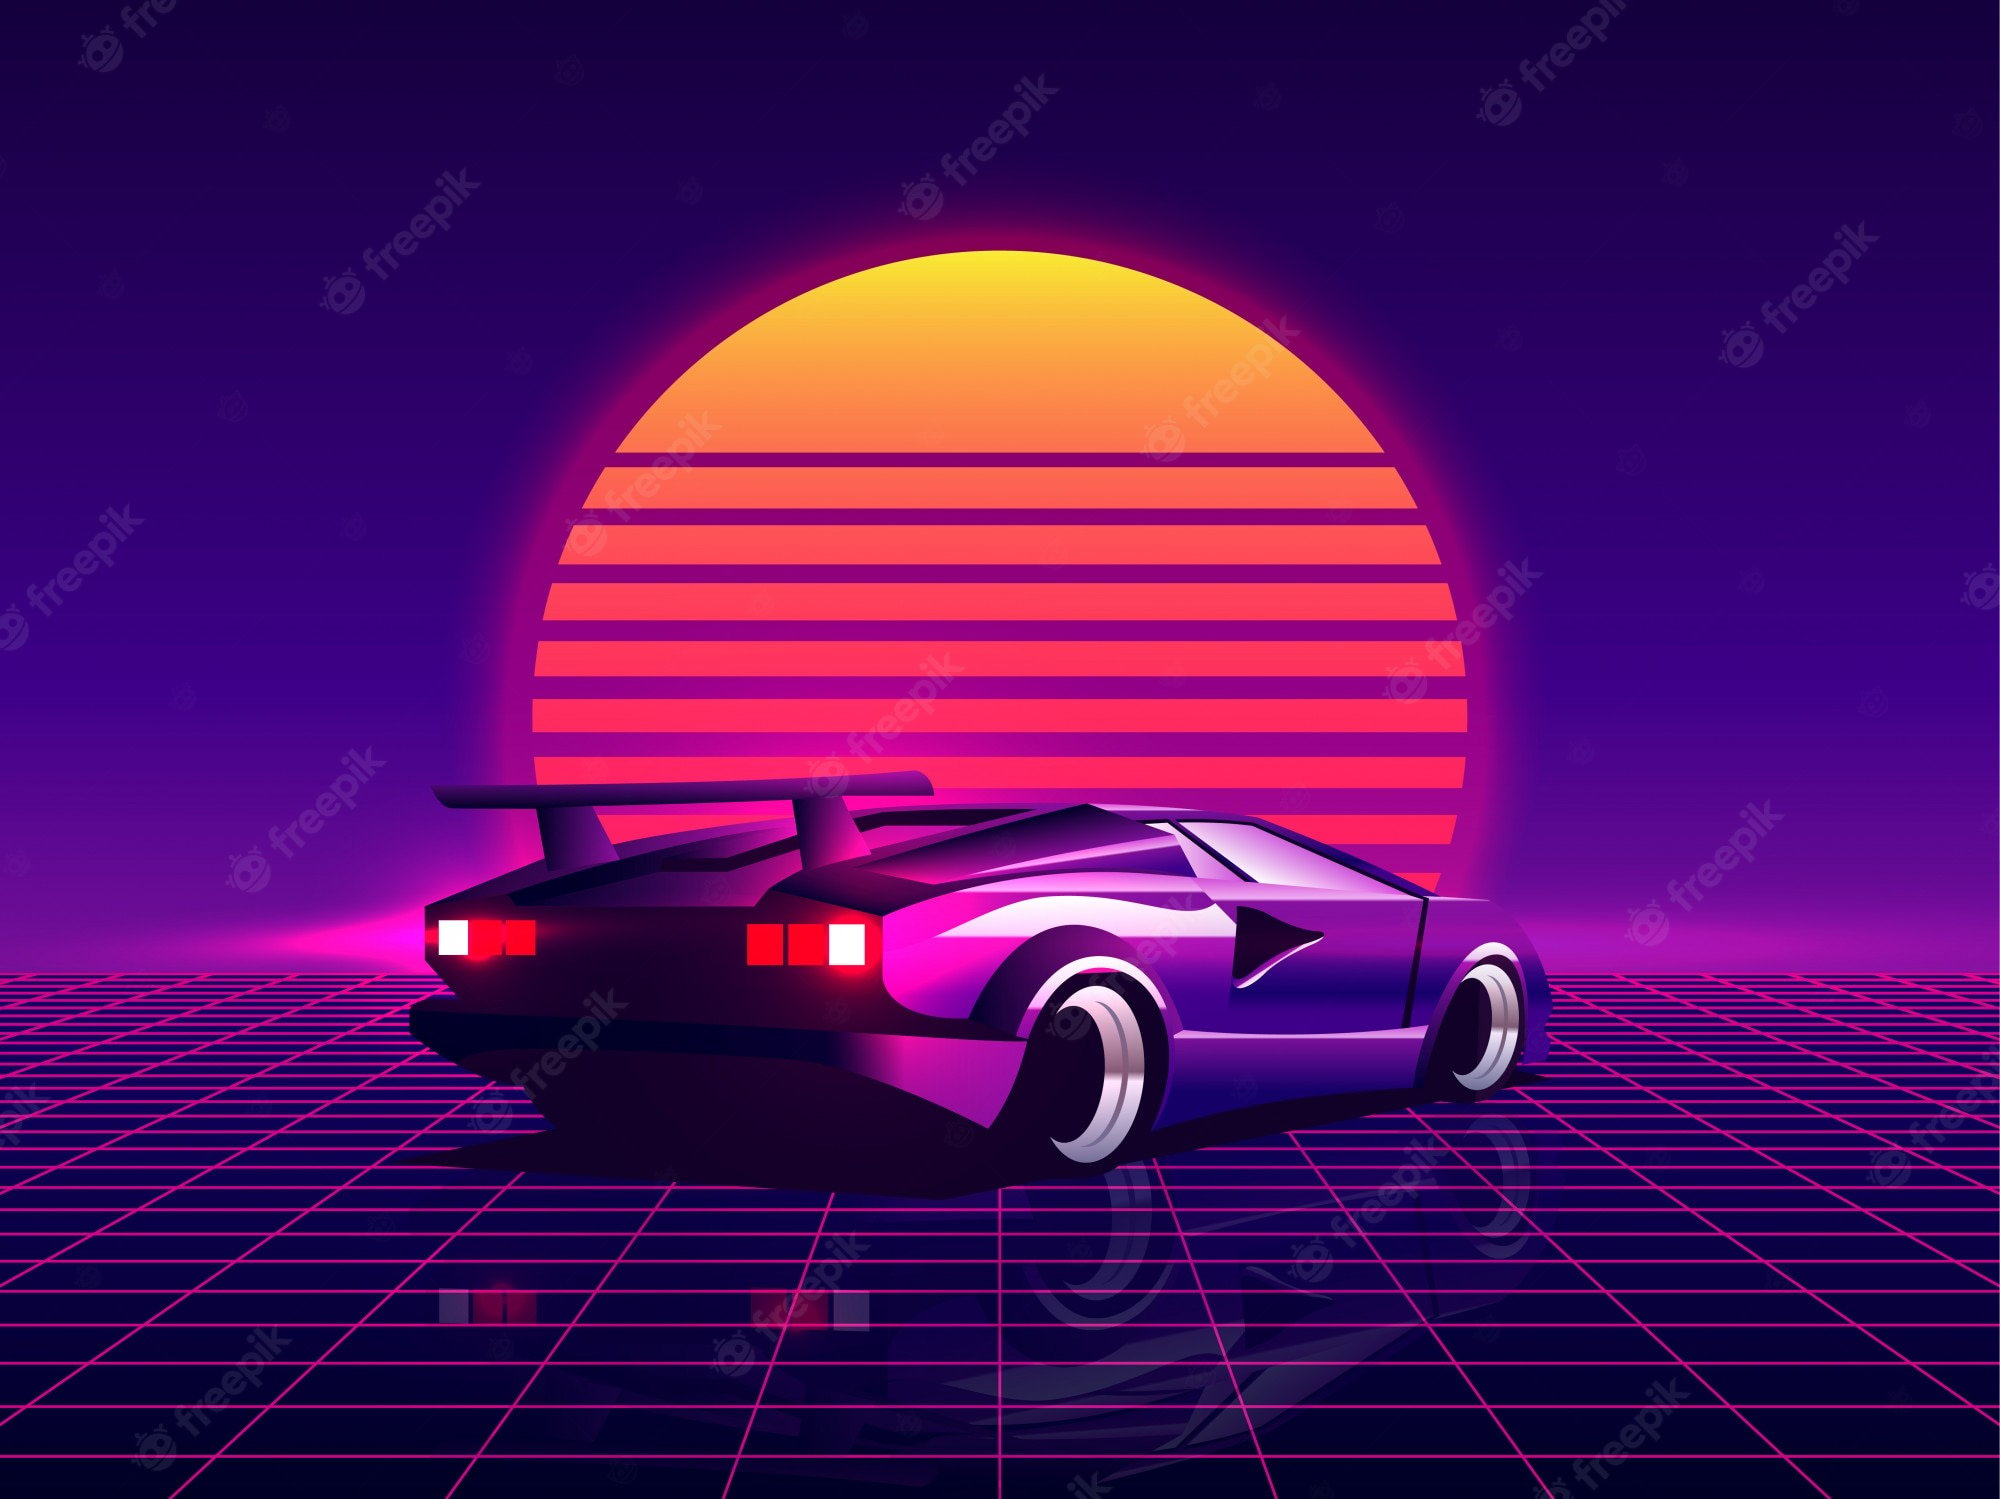 Premium Vector. Retro futuristic back side view 80s supercar on trendy synthwave / vaporwave / cyberpunk sunset background. back to 80's concept